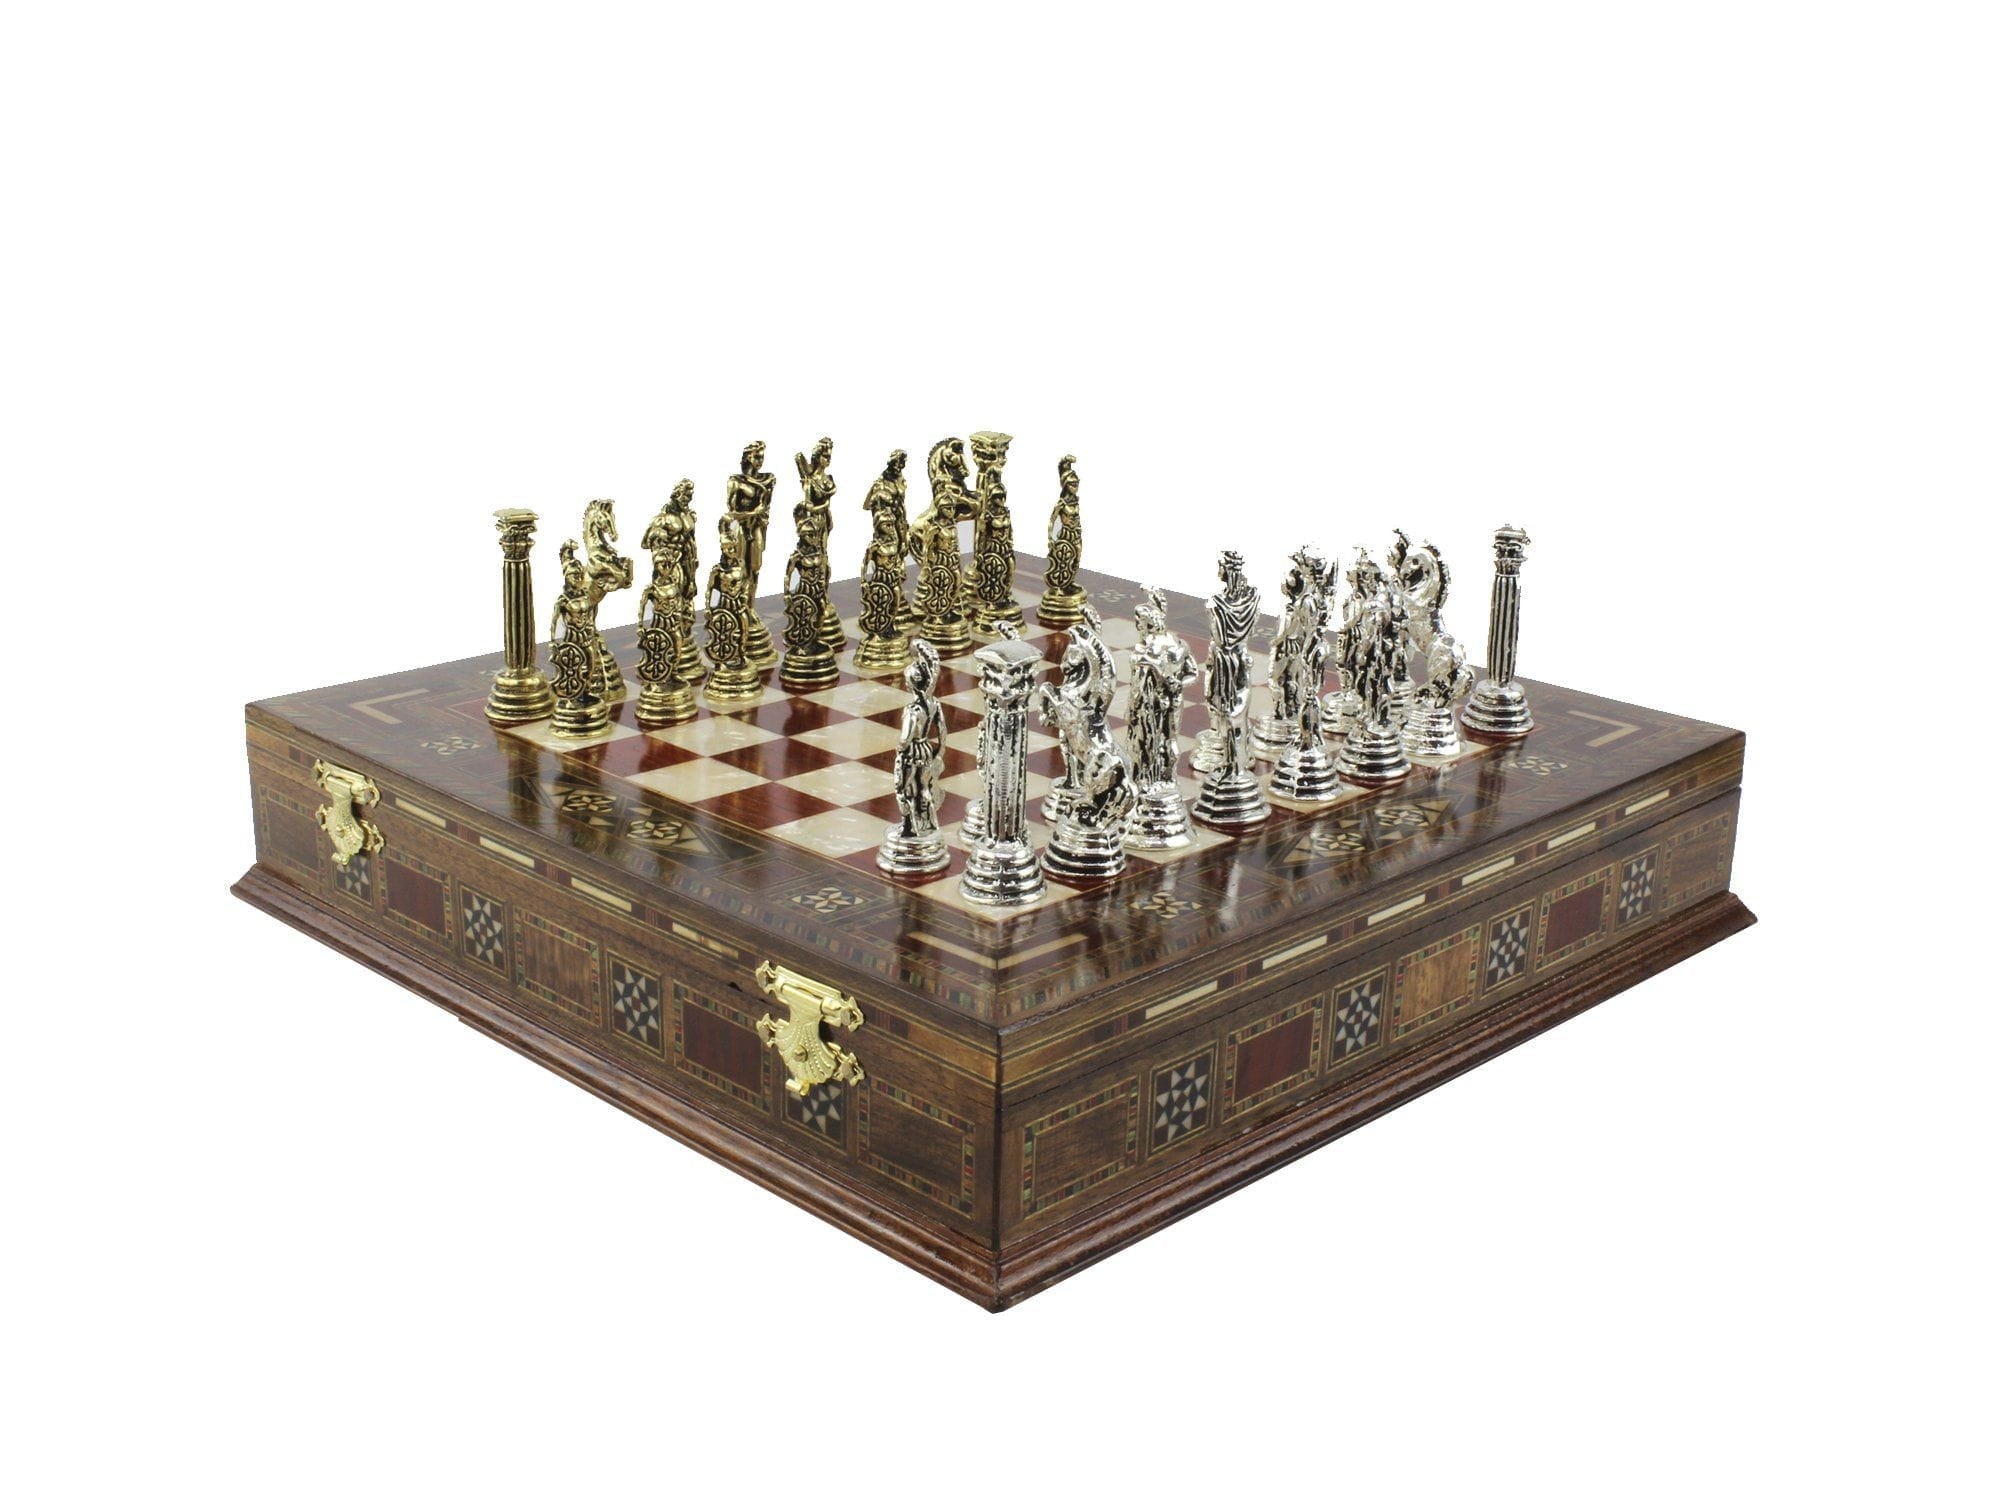 Personalised 10.8 Inches Red Wood Chess Set